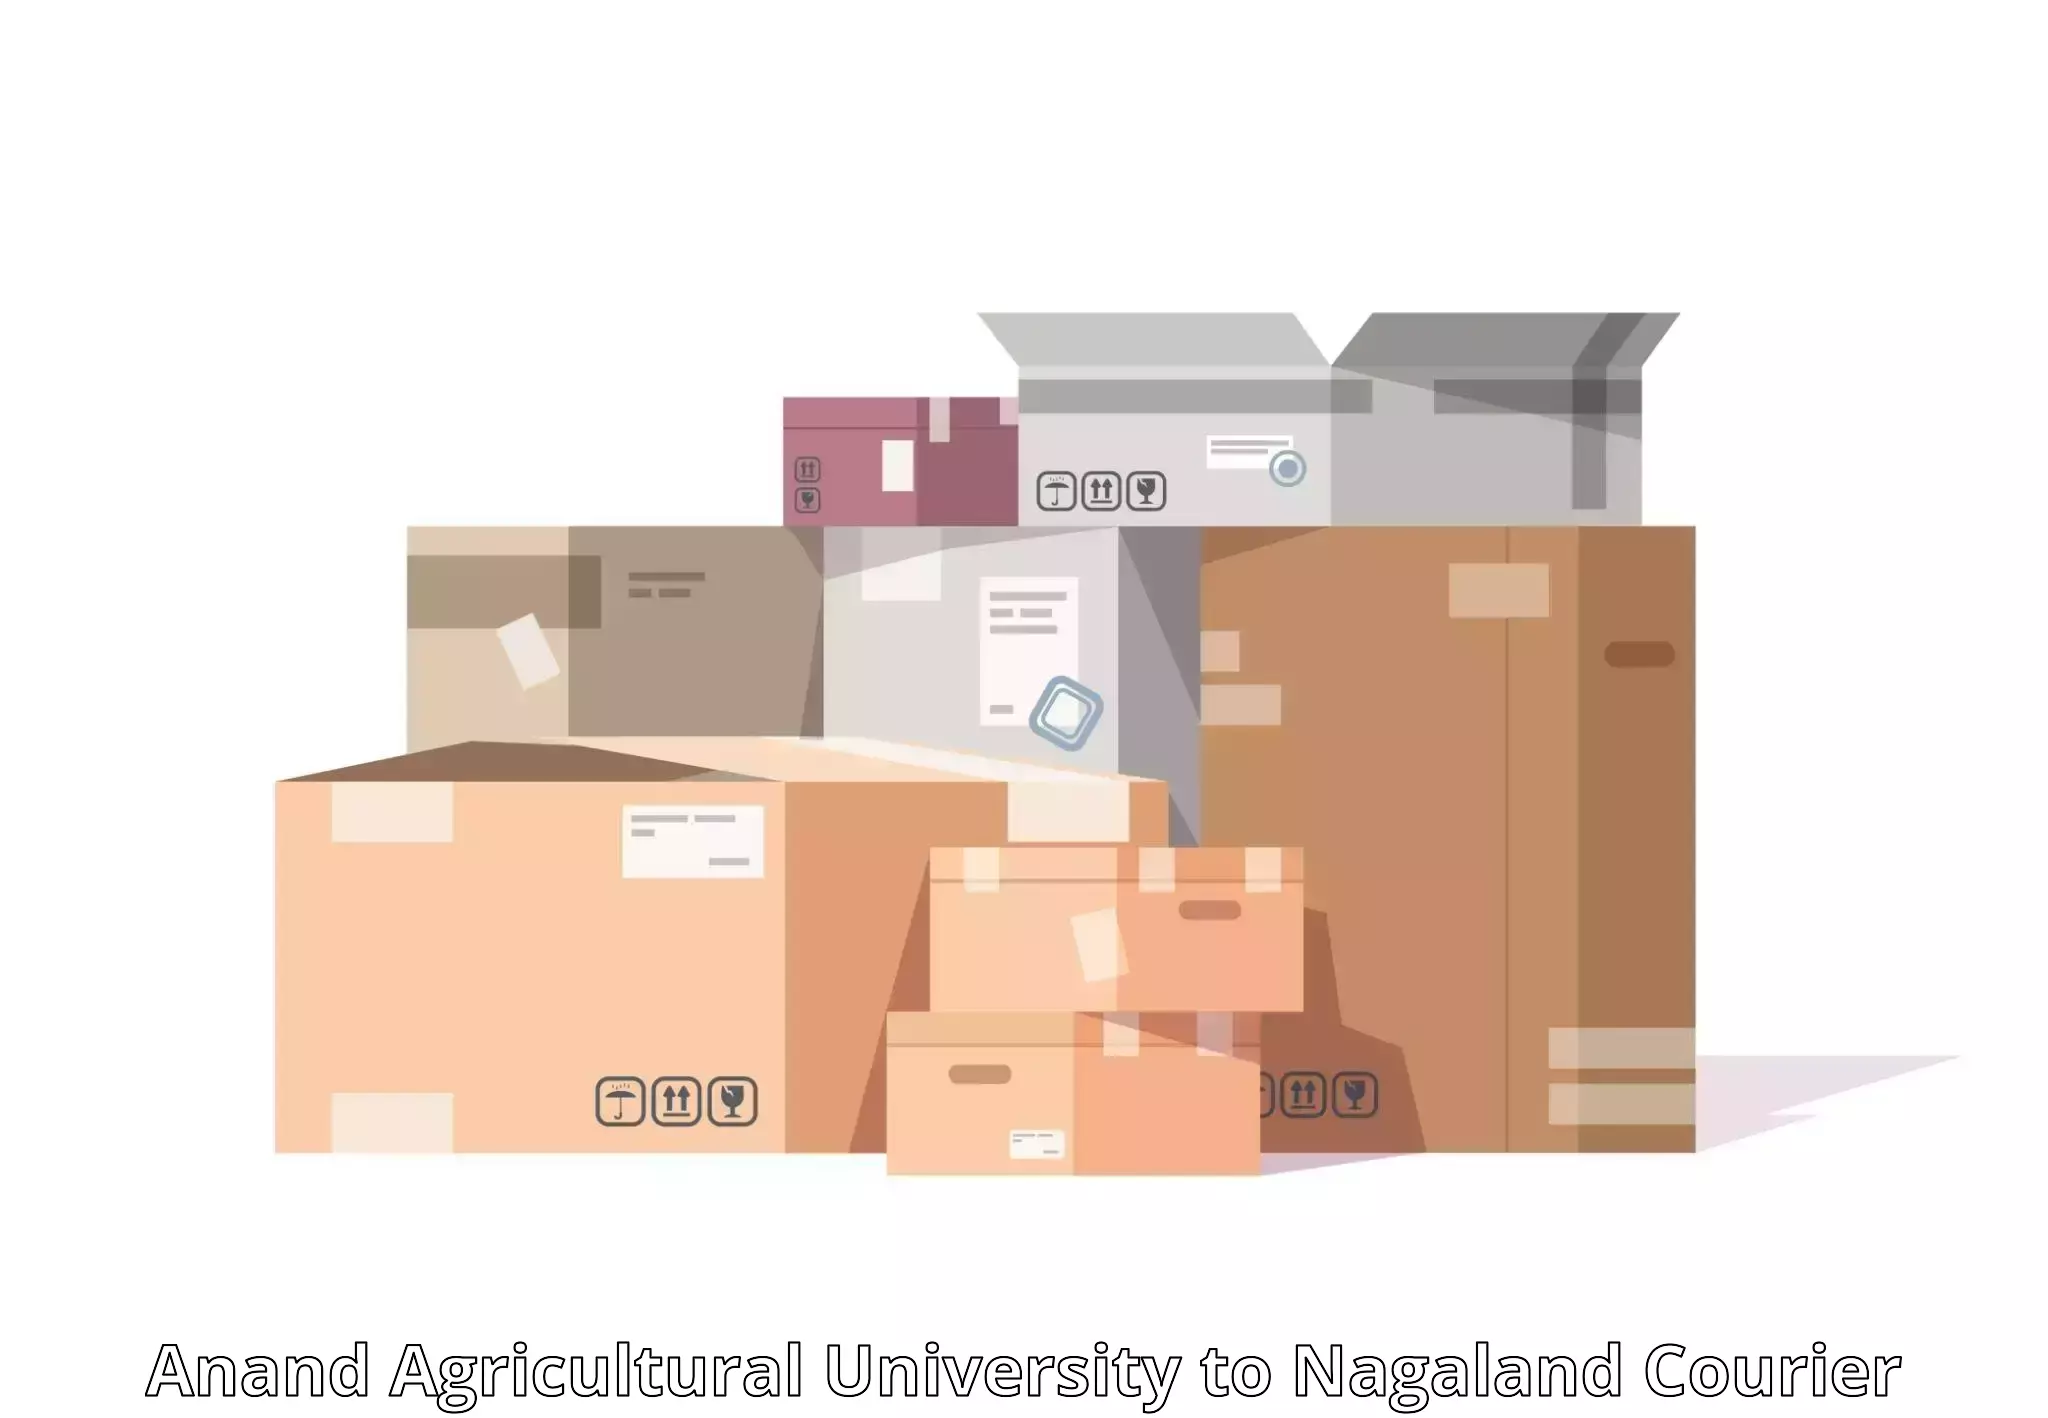 Express package services Anand Agricultural University to Kiphire